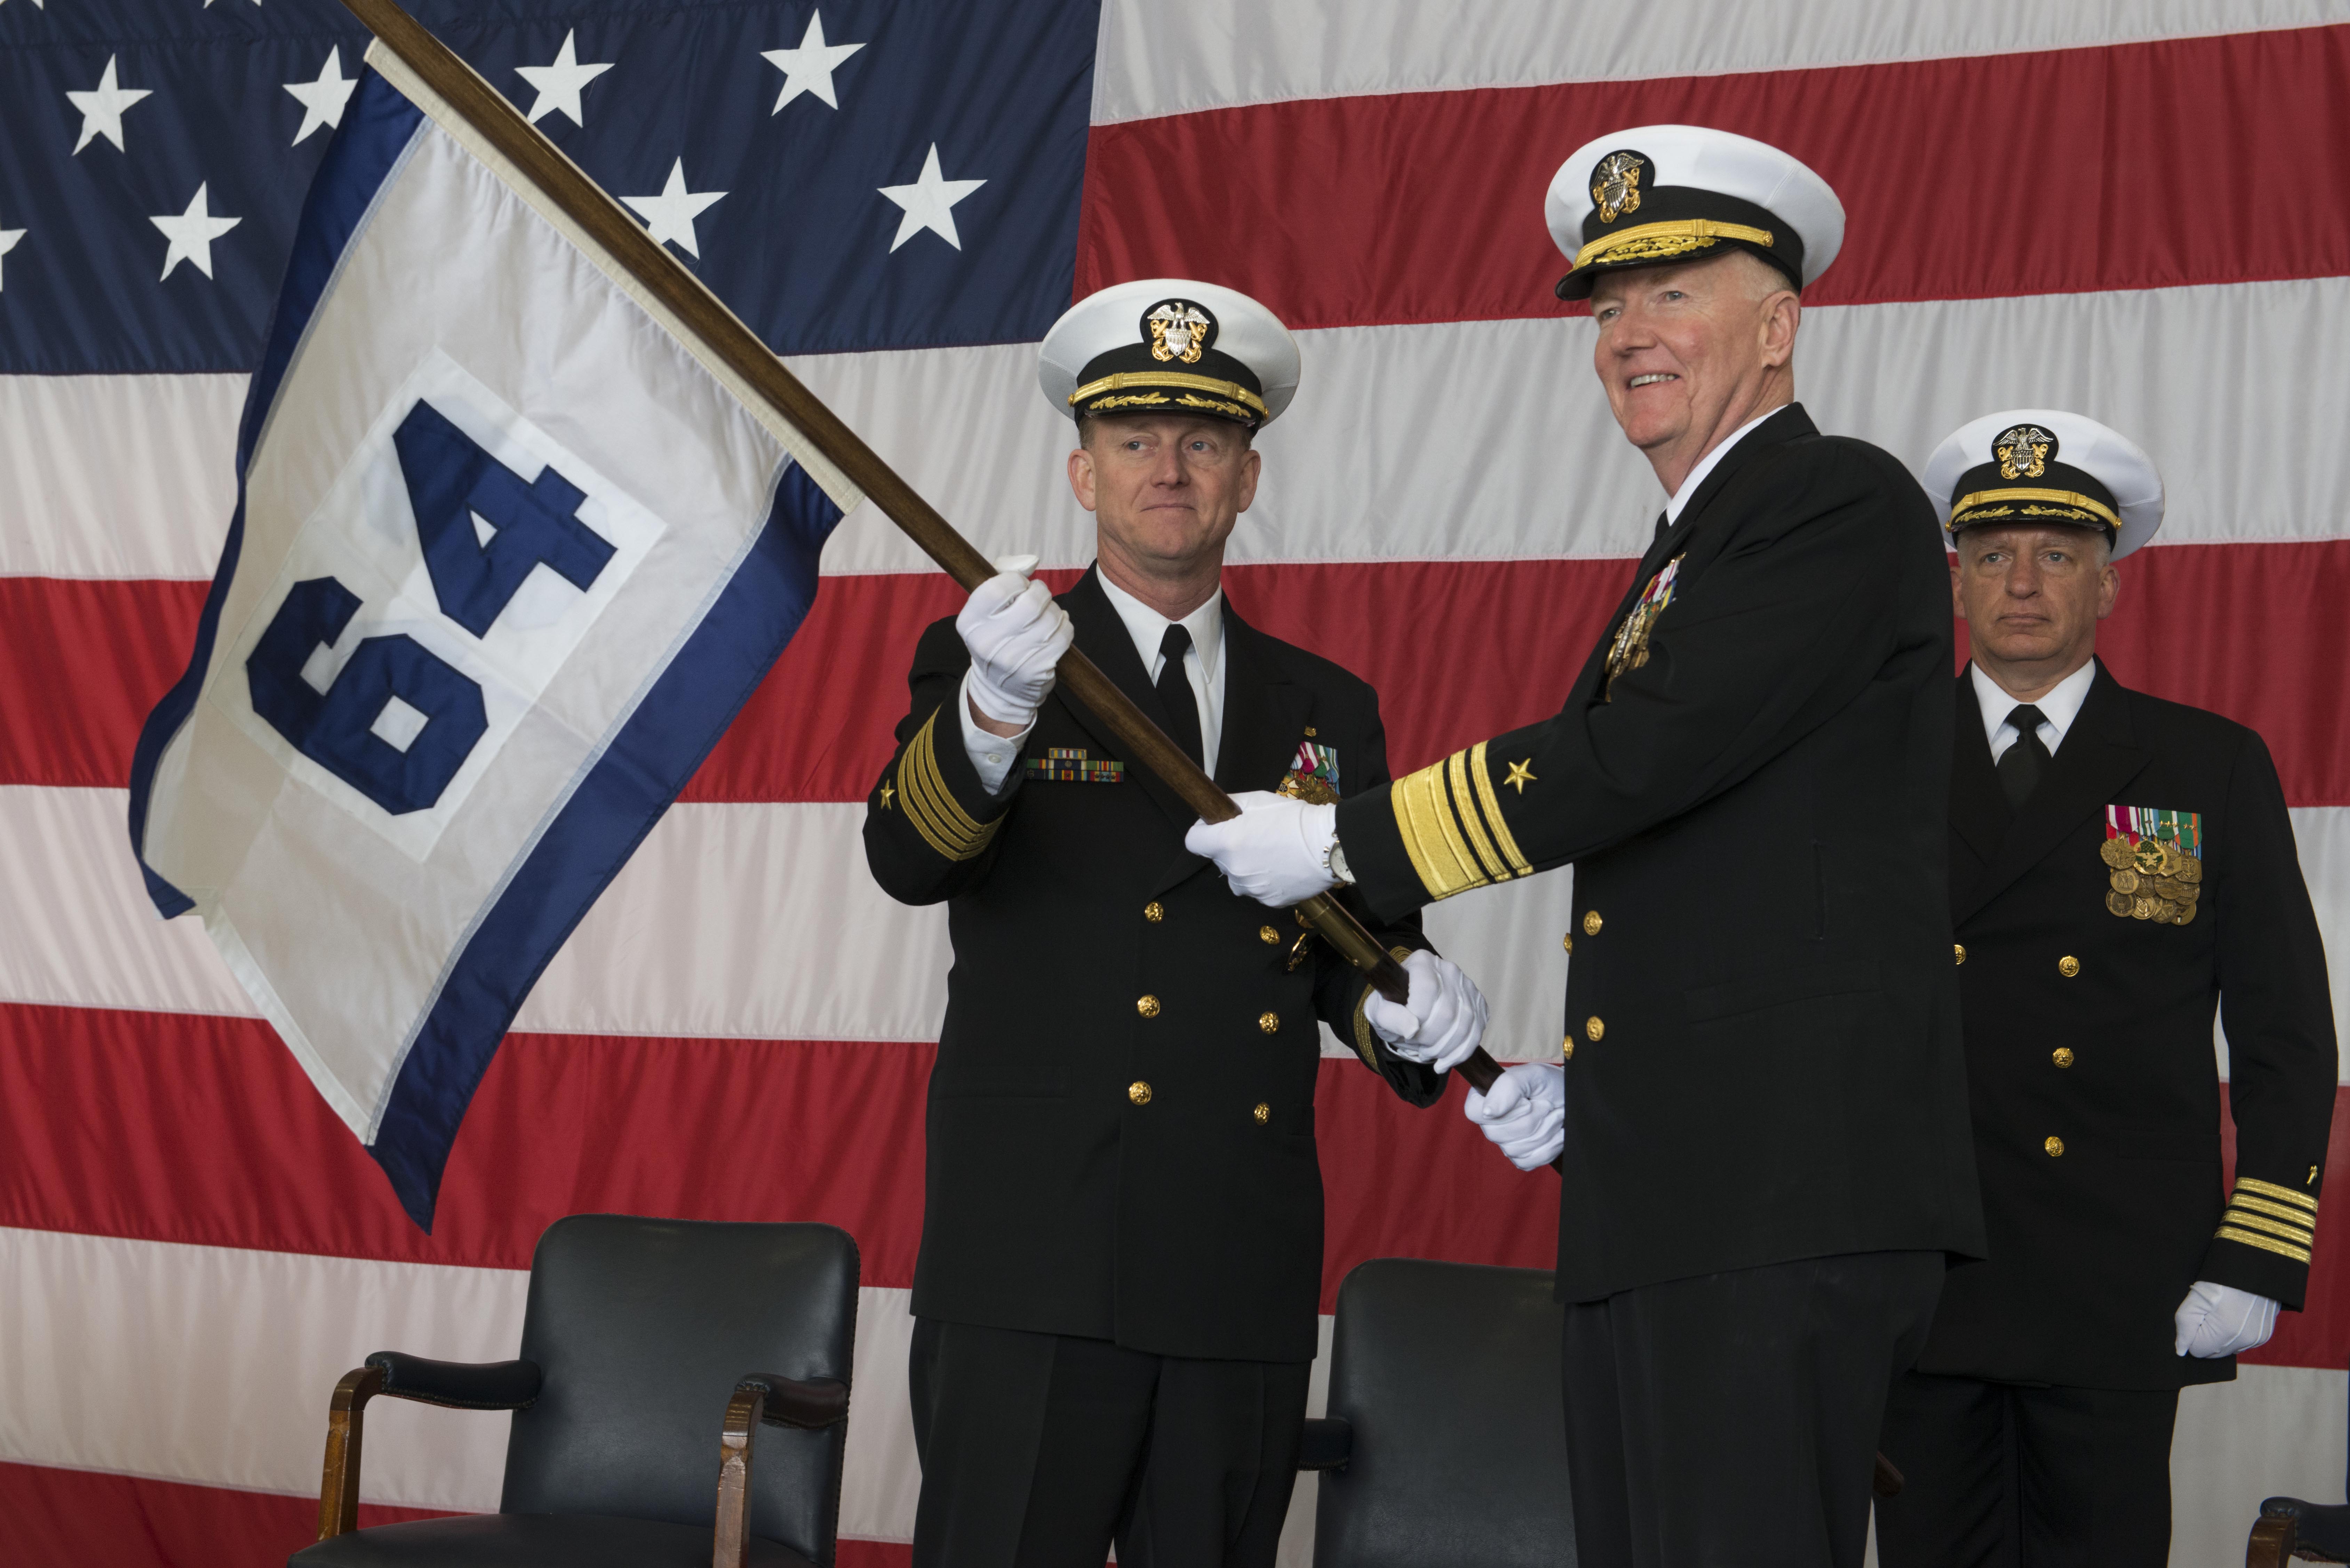 Vice Adm. James Foggo III, right, commander of U.S. 6th Fleet, hands Capt. Jeffrey Wolstenholme the Commander, Task Force 64 (CTF 64) guidon during the command’s establishment ceremony at U.S. Naval Support Activity Naples March 24, 2016. US Navy photo.